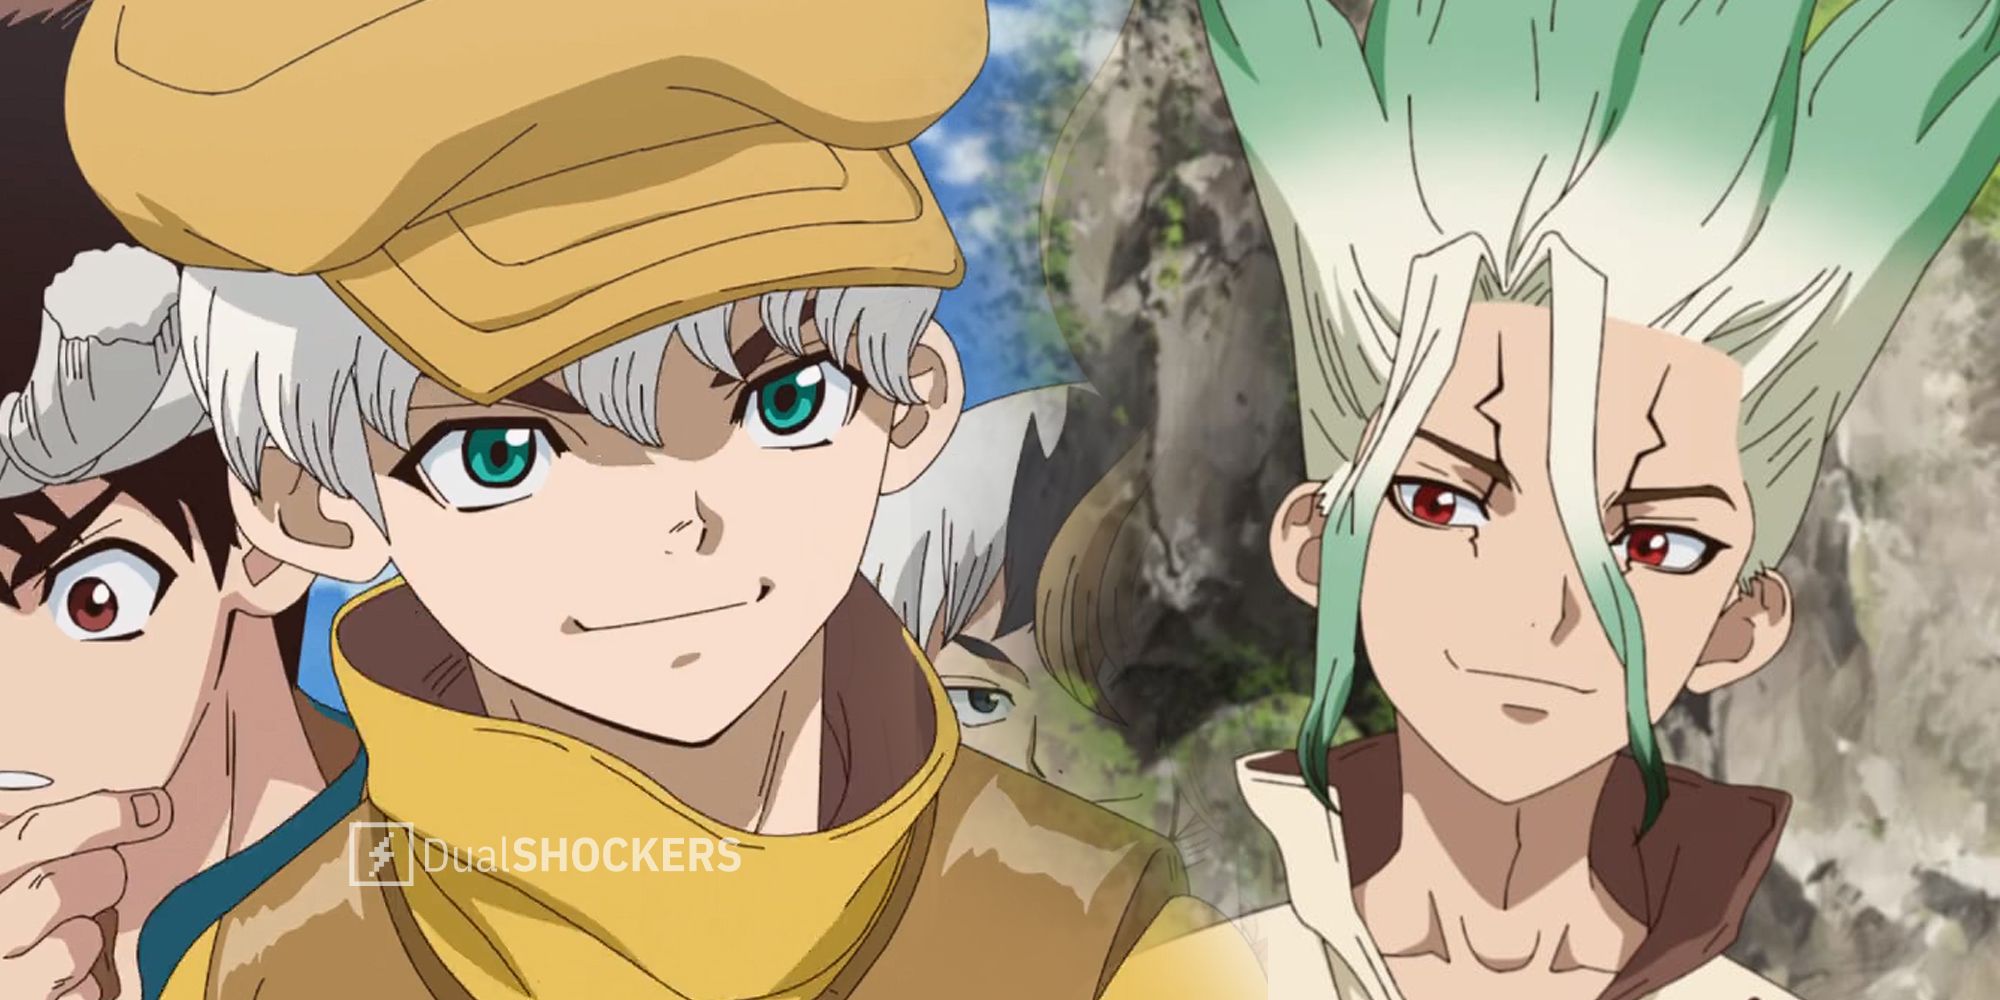 Dr. Stone Season 3 Episode 5 Release Date & Time